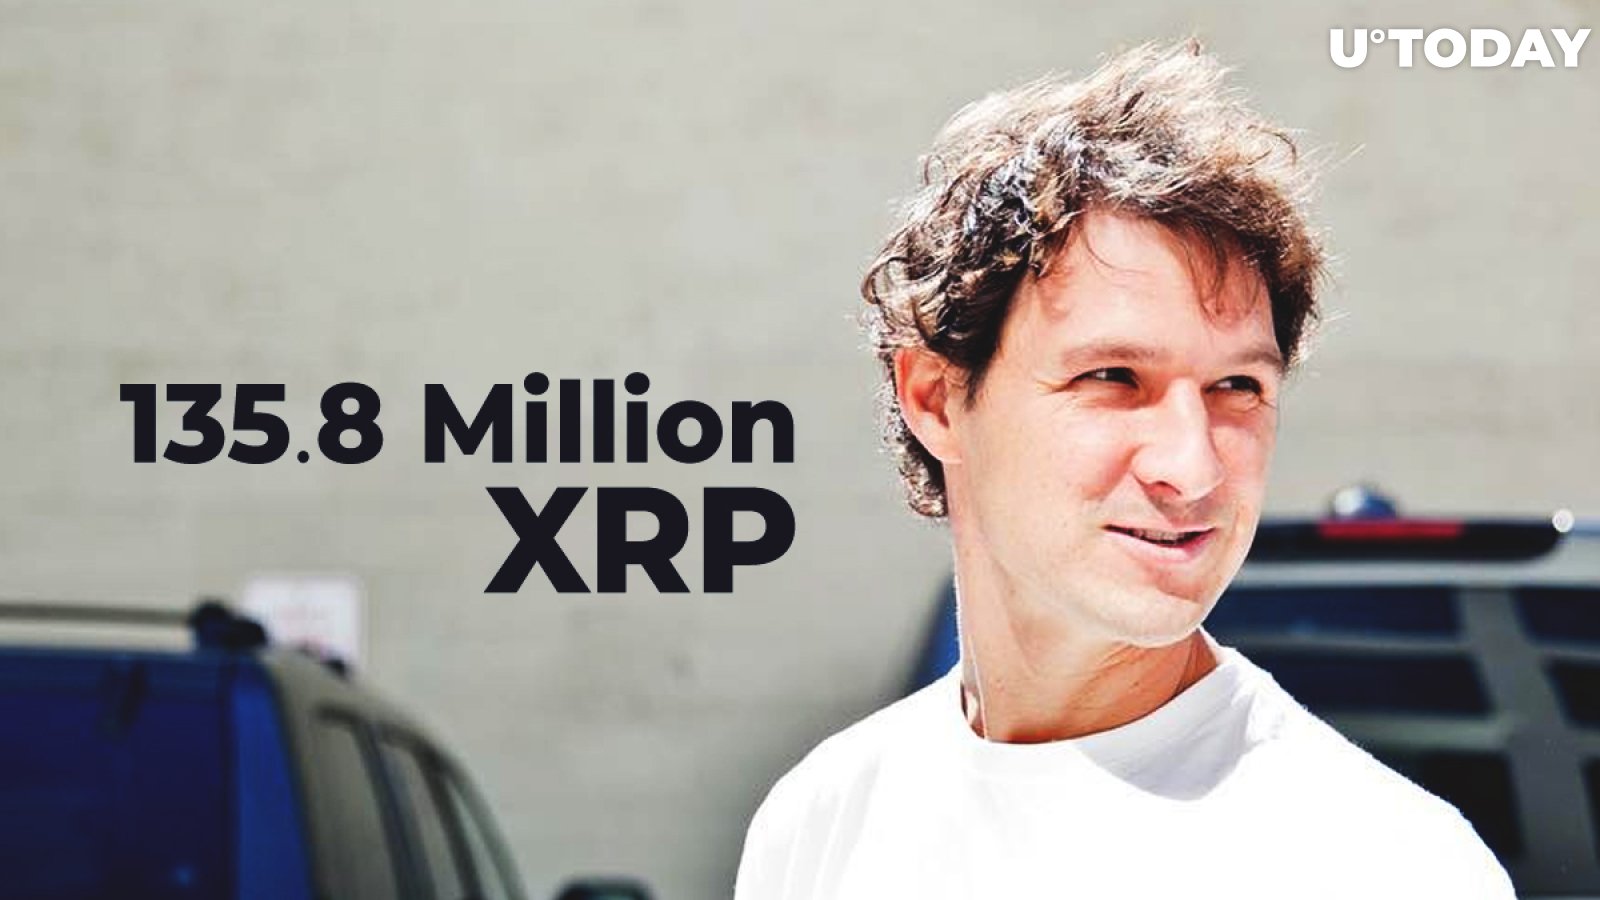 Jed McCaleb Cashes Out 135.8 Million XRP Over Past Week, Balance Shrinks to 76.3 Million